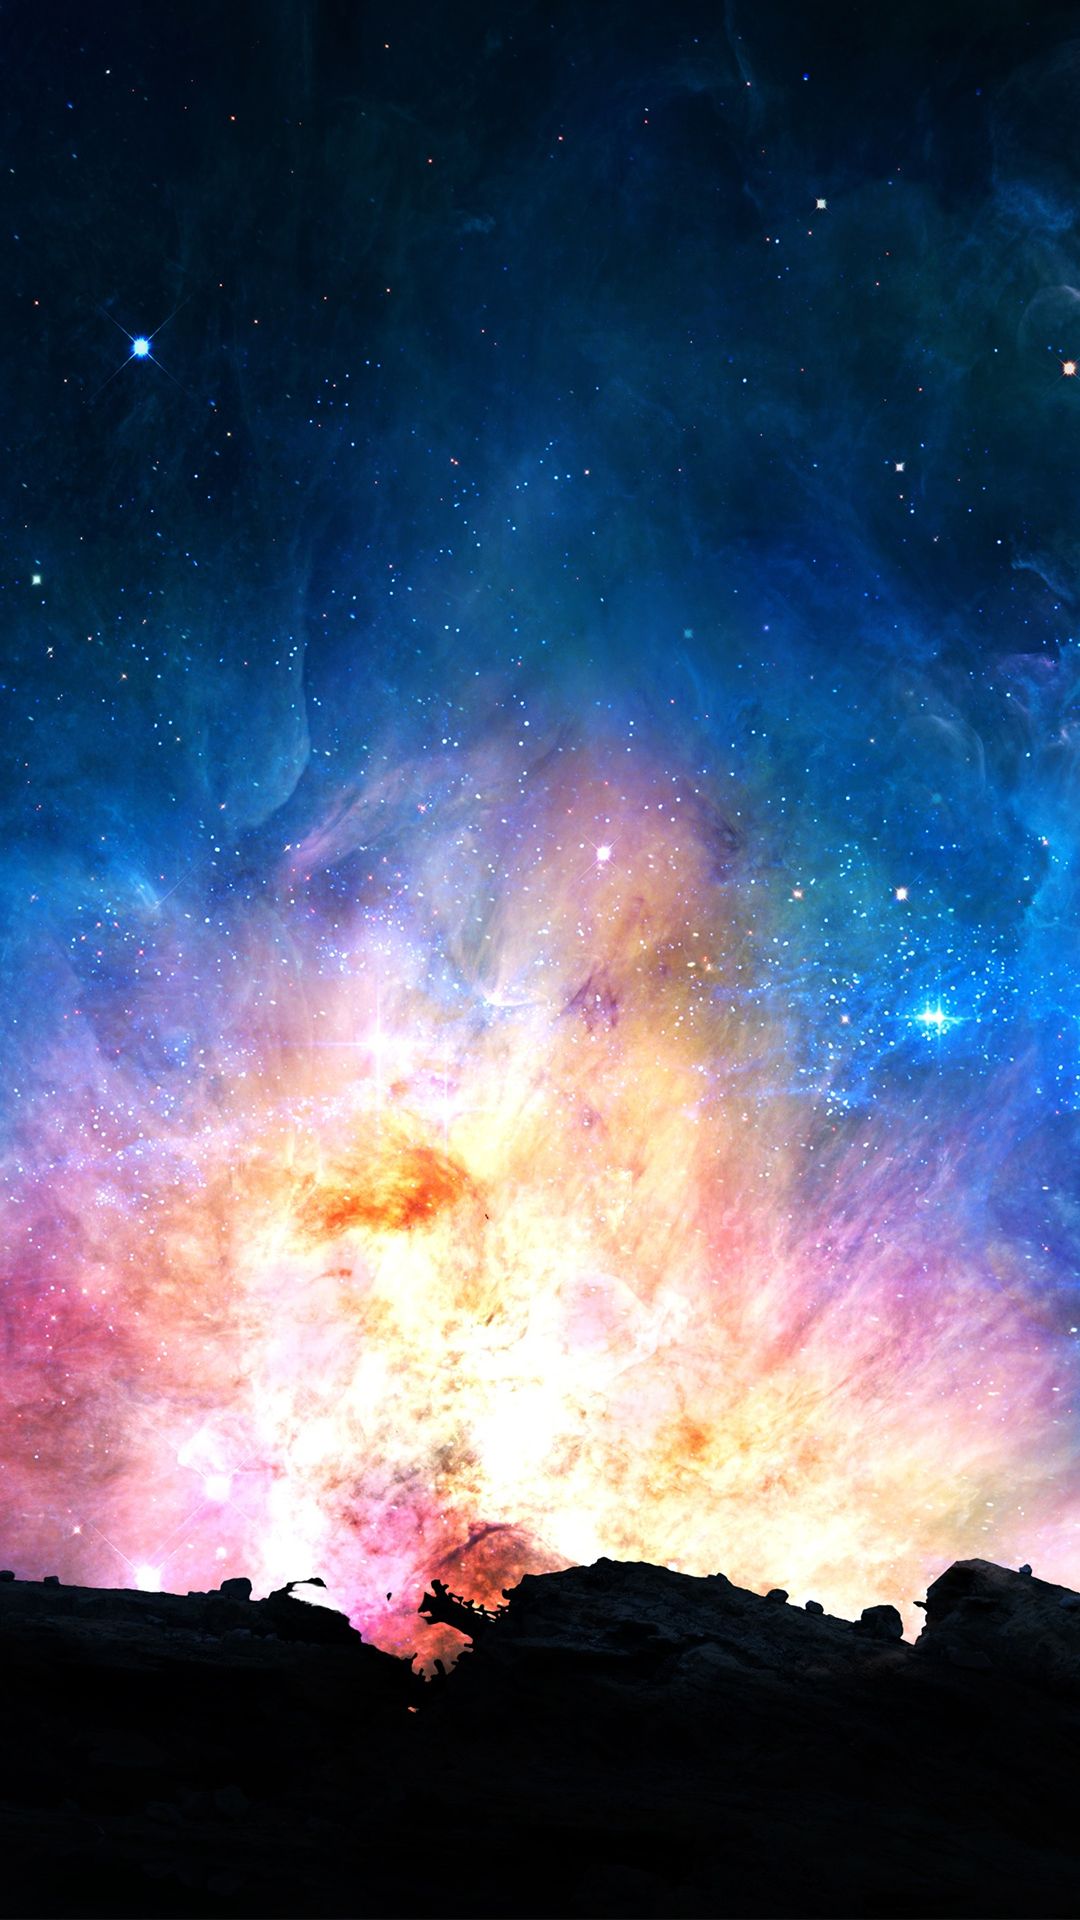 iPhone Wallpaper High Resolution 7239 - HD Wallpapers Site